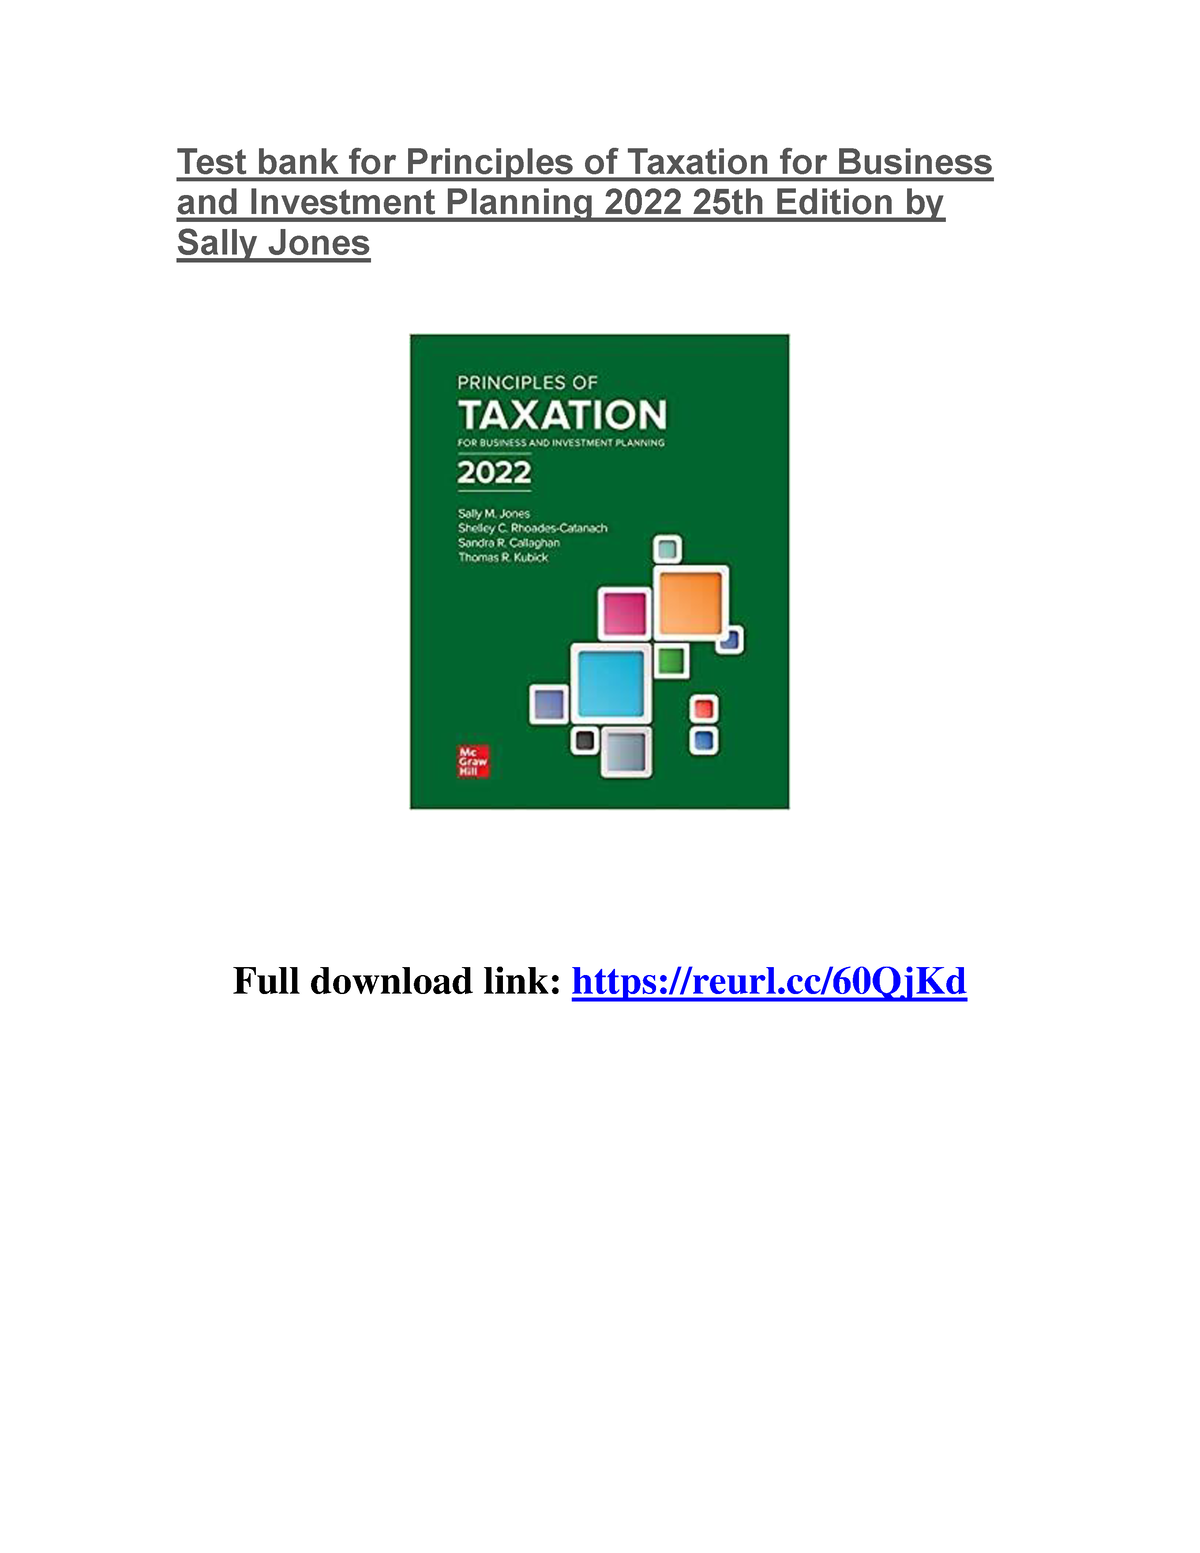 business planning taxation study resources